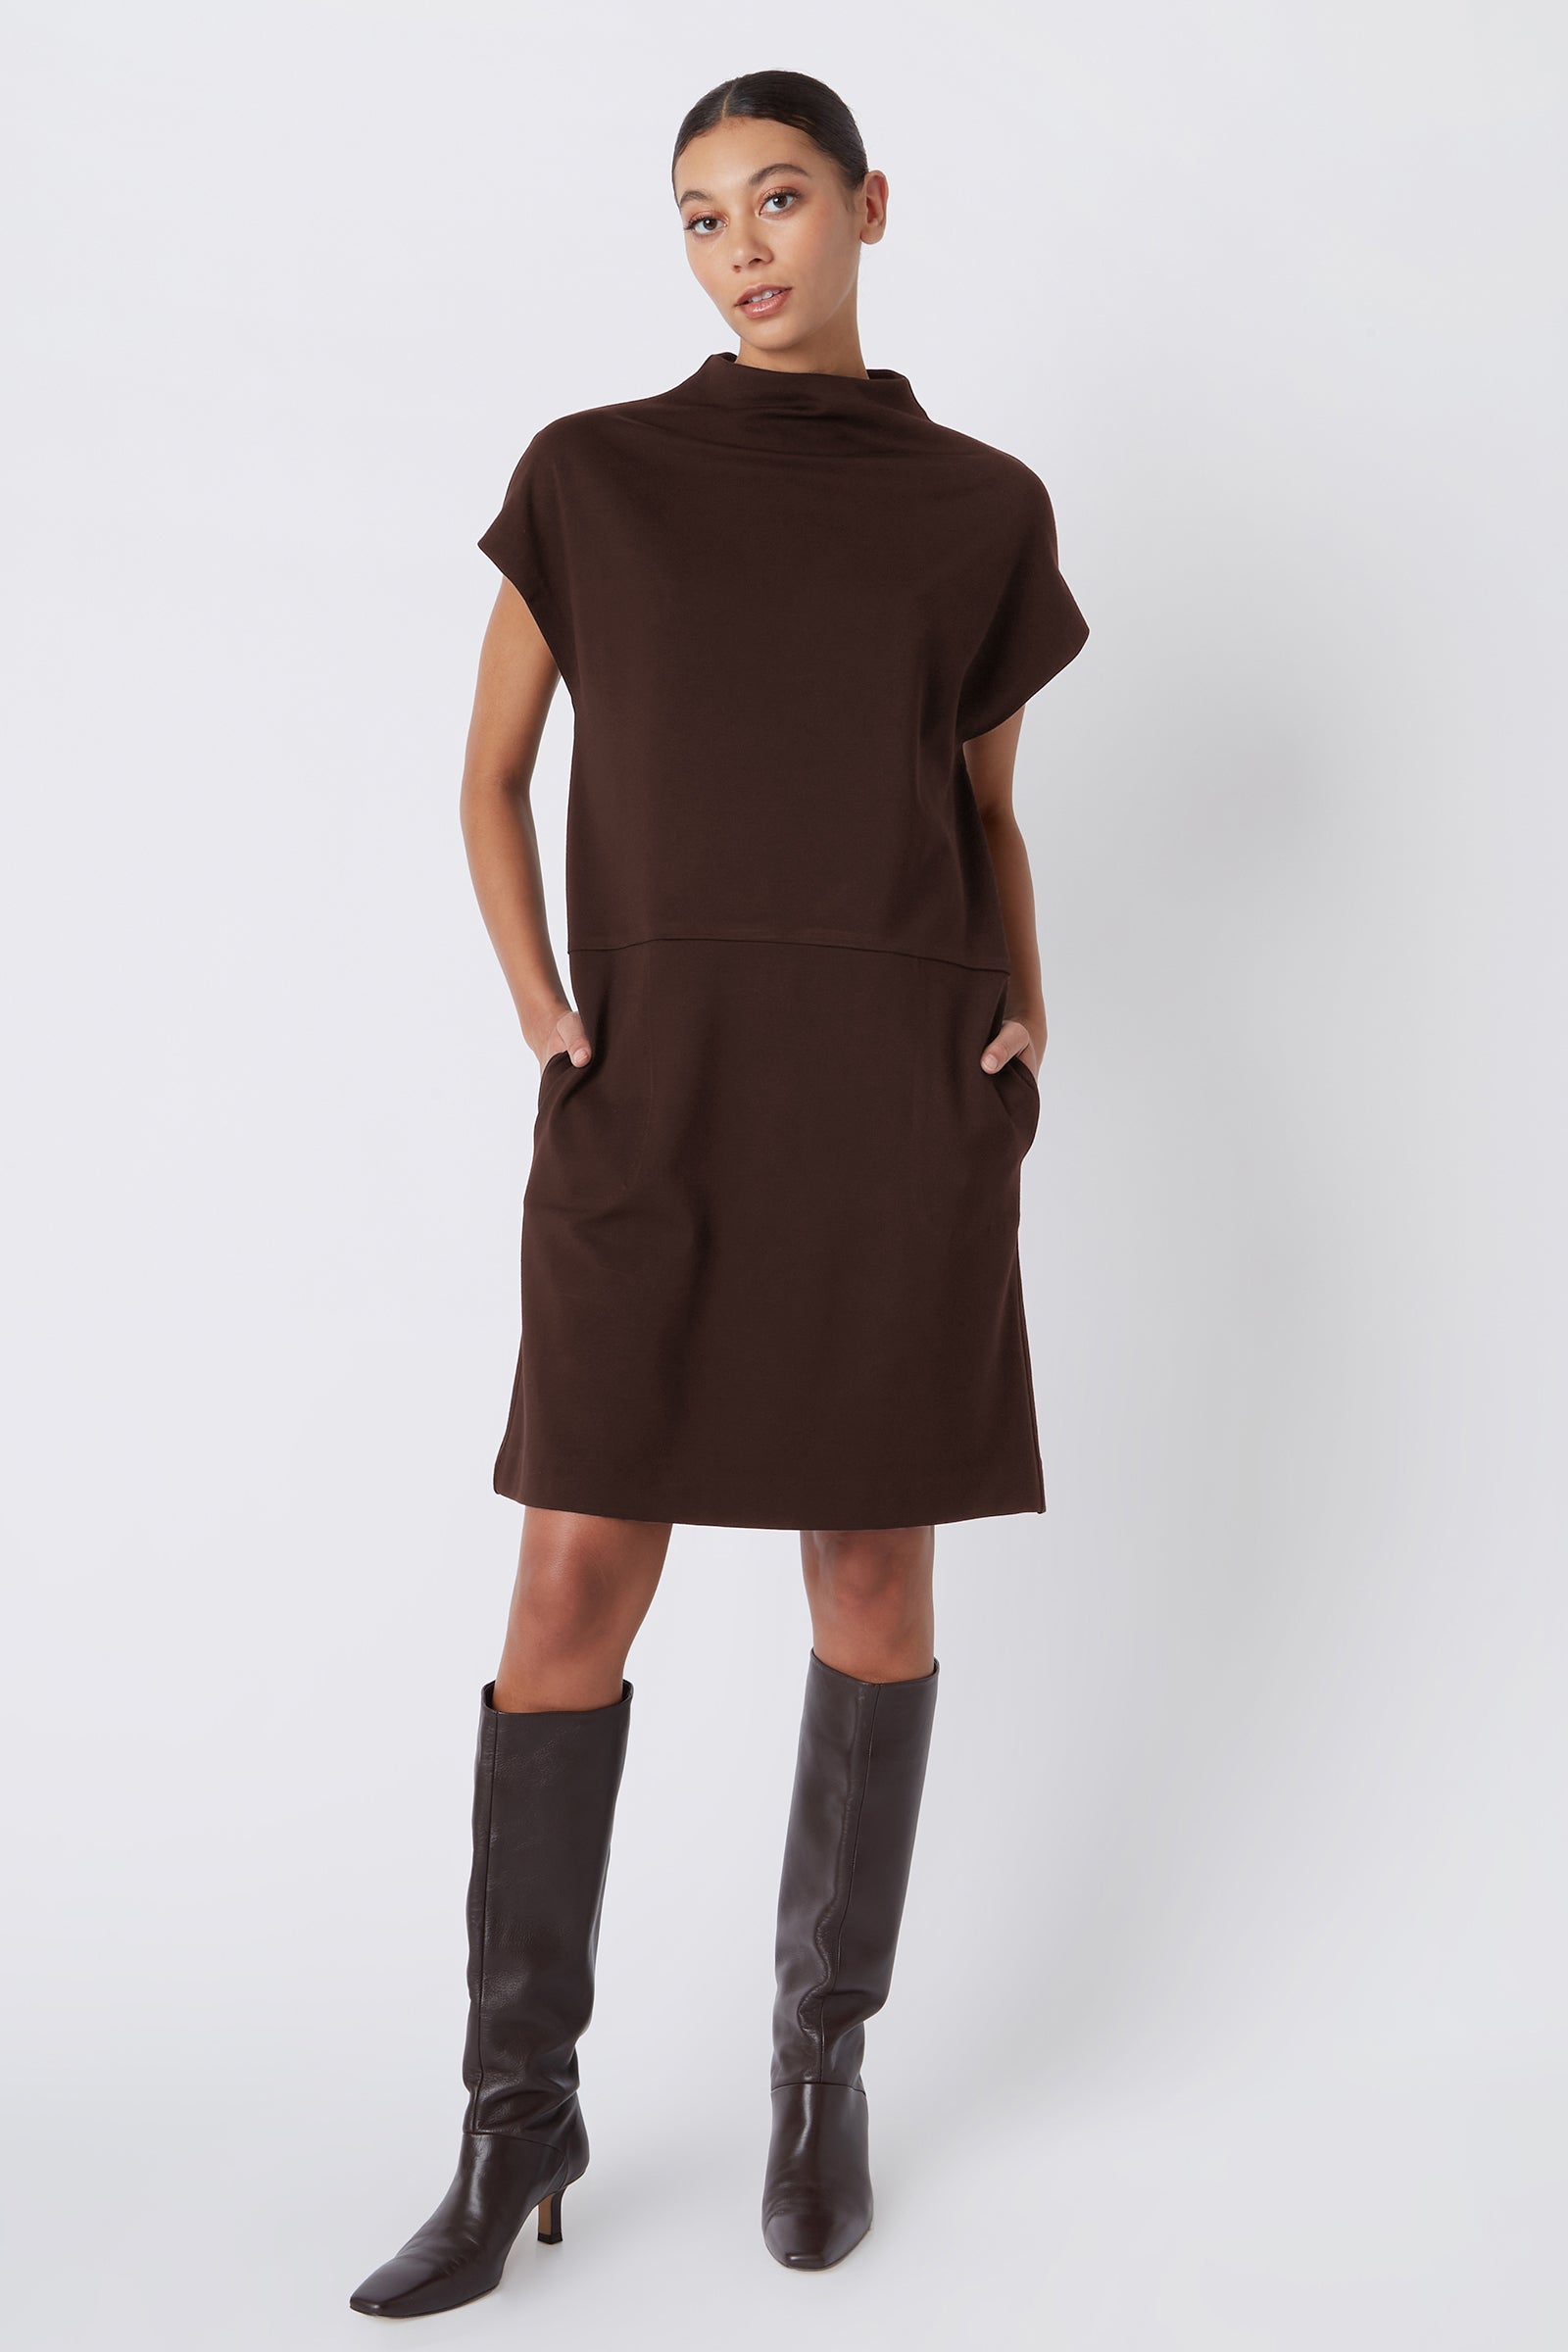 Kal Rieman Maya Funnelneck Dress in Espresso Ponte on model with hands in pockets full front view